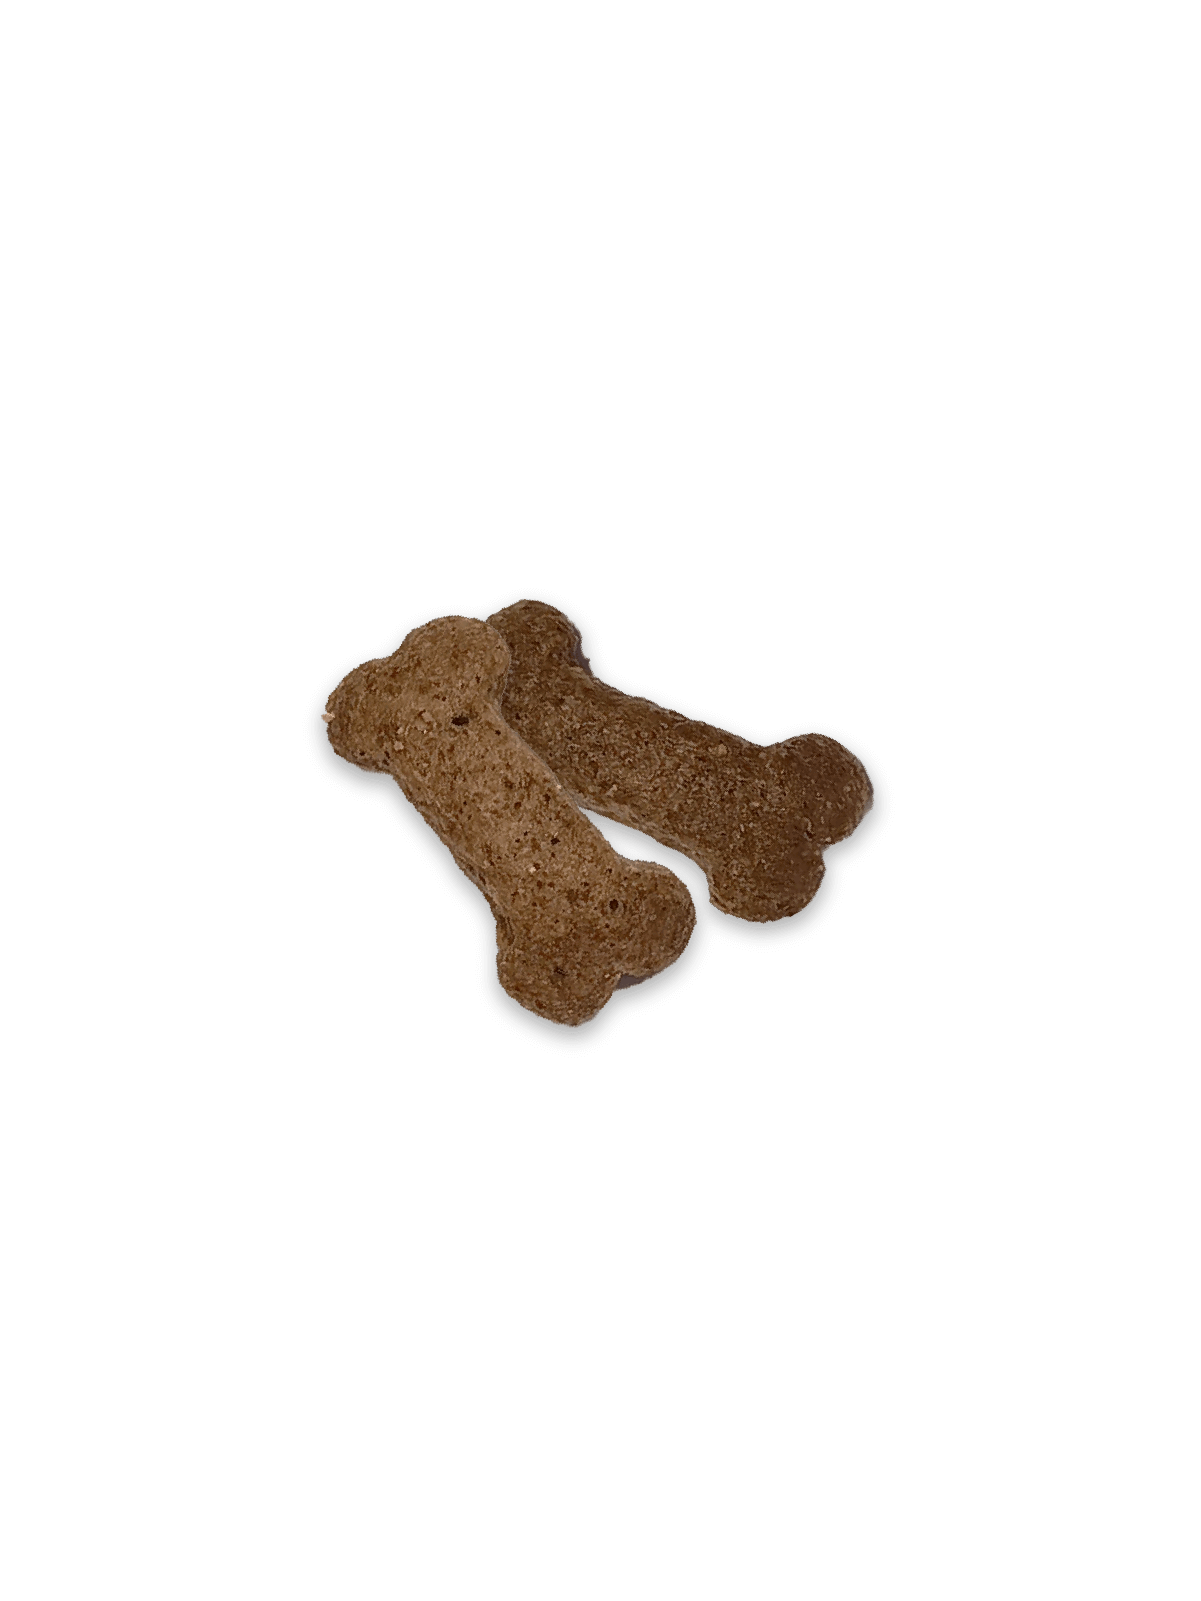 Multifit dog mini bone supplements good for skin and coat, gut health and mobility, natural high protein ingredients